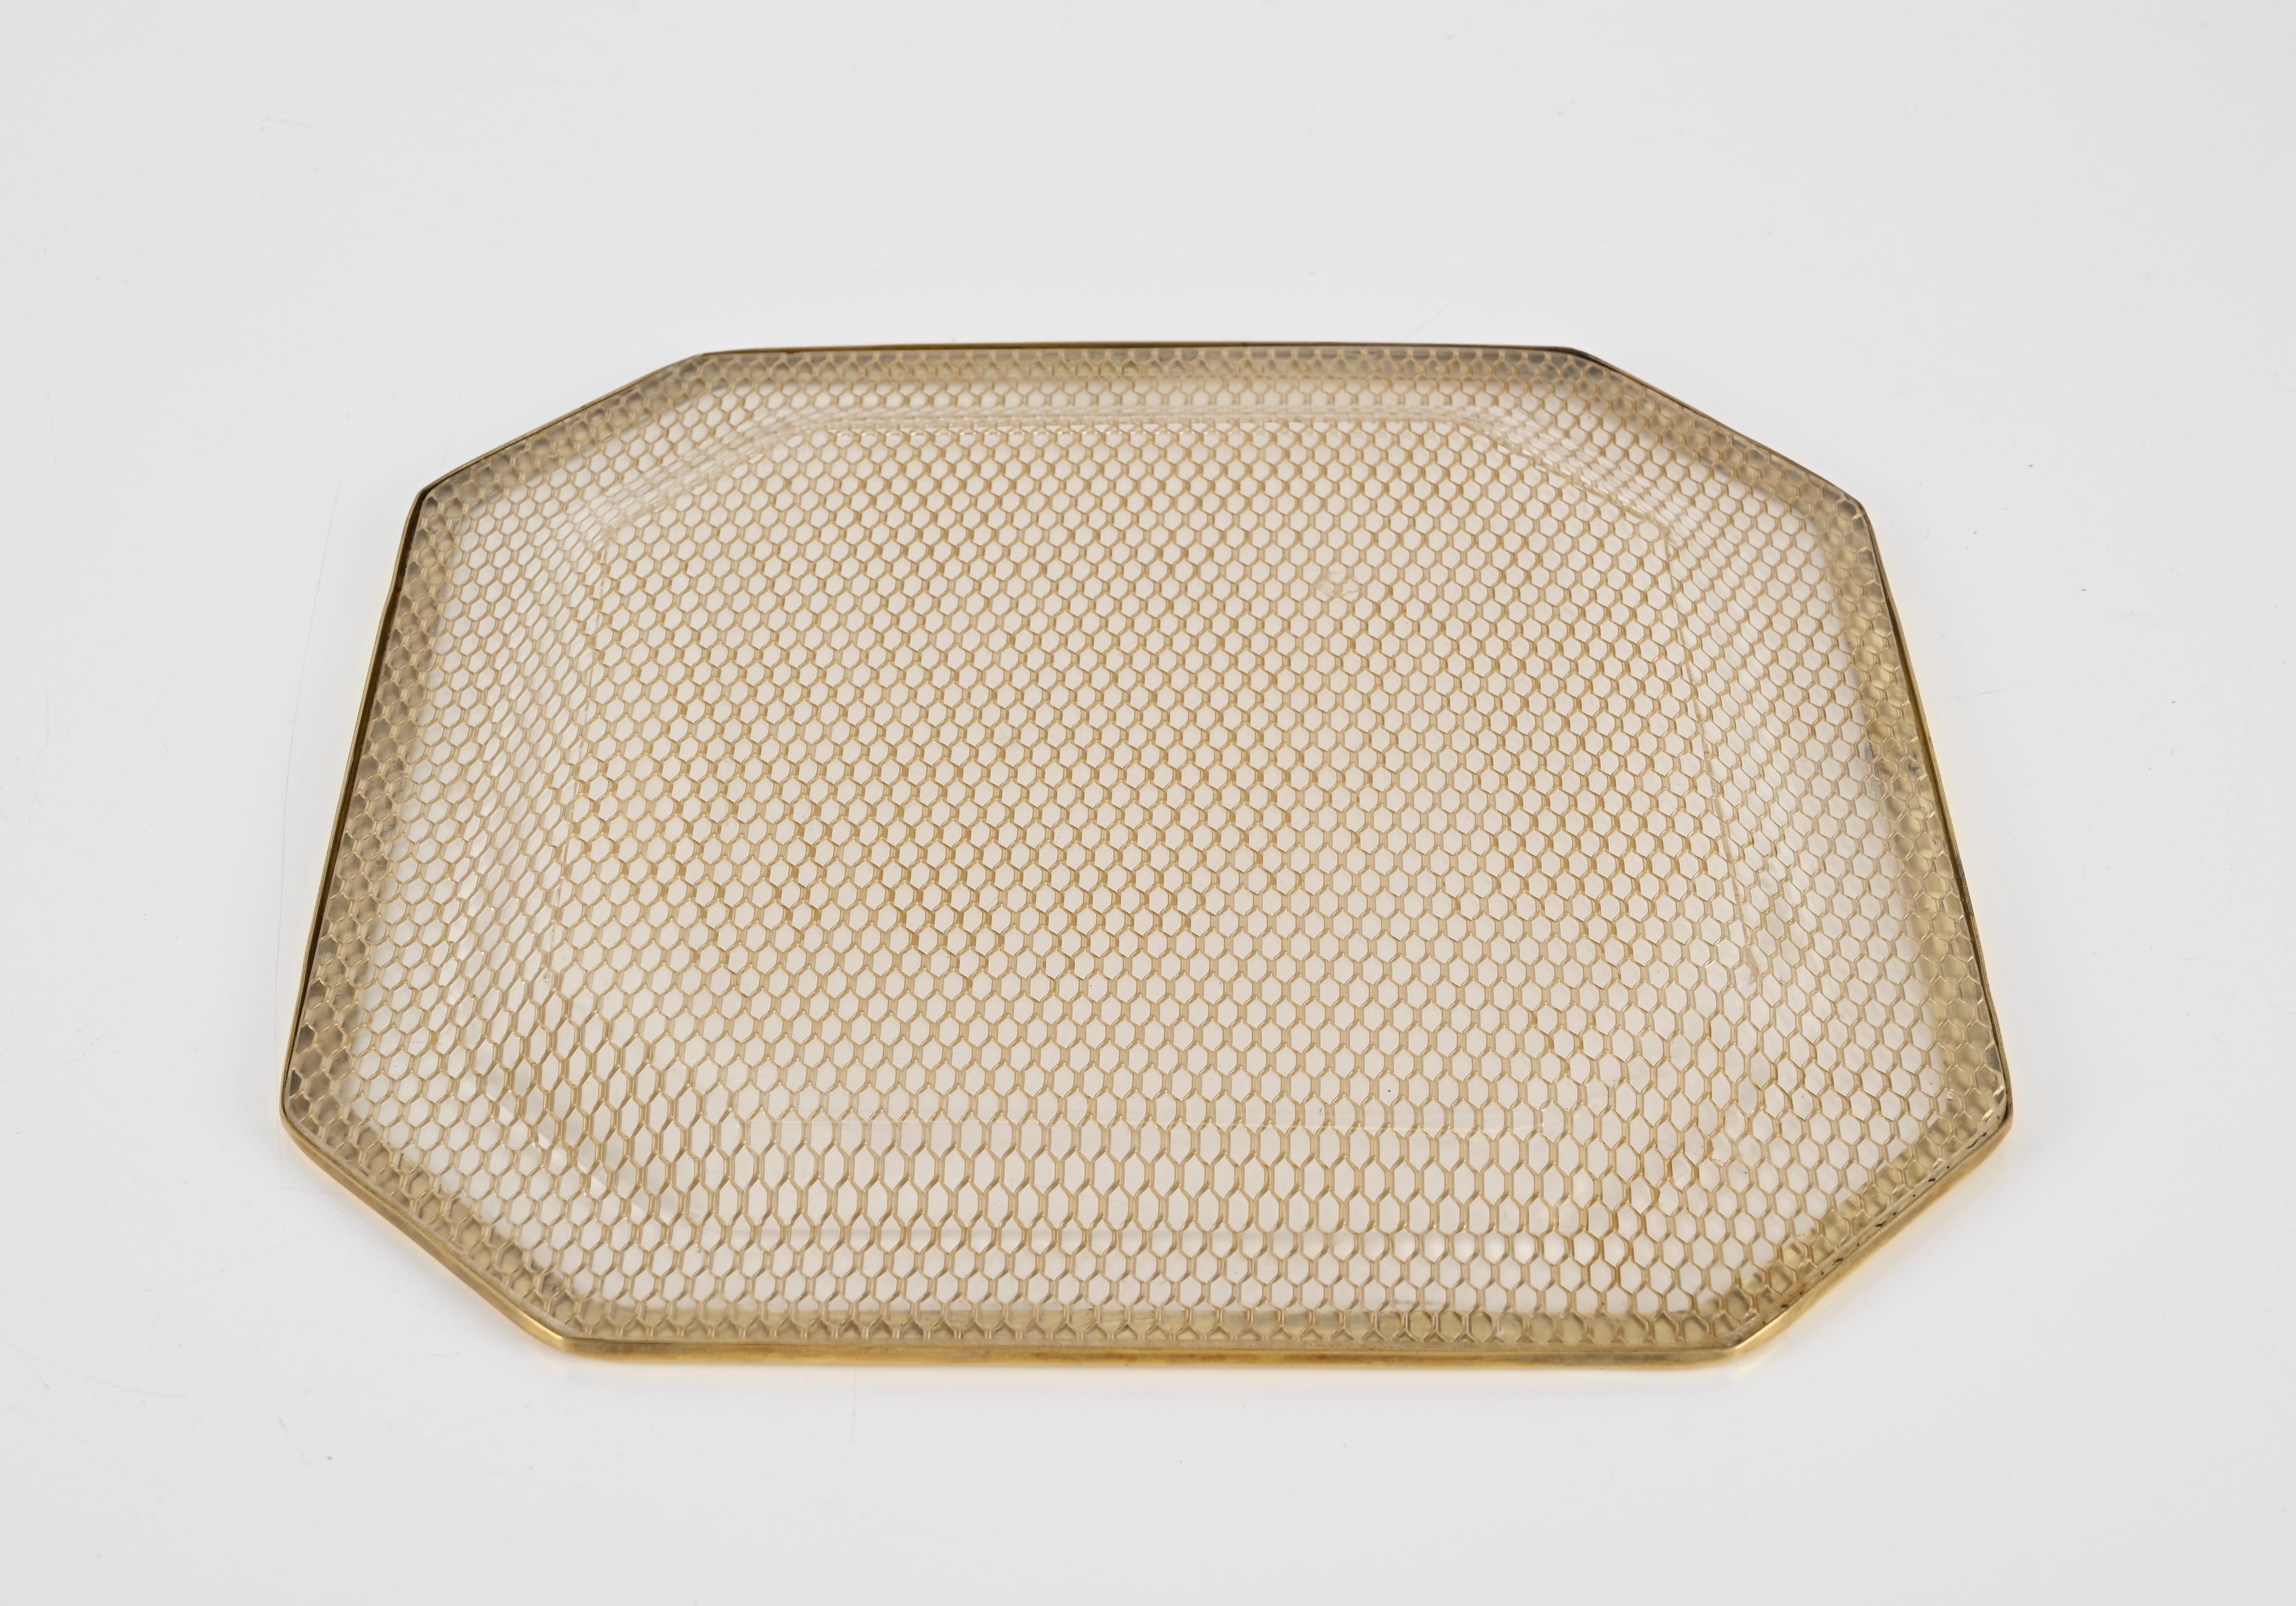 Midcentury Lucite and Brass Octagonal Italian Tray, Willy Rizzo Style, 1970s For Sale 5